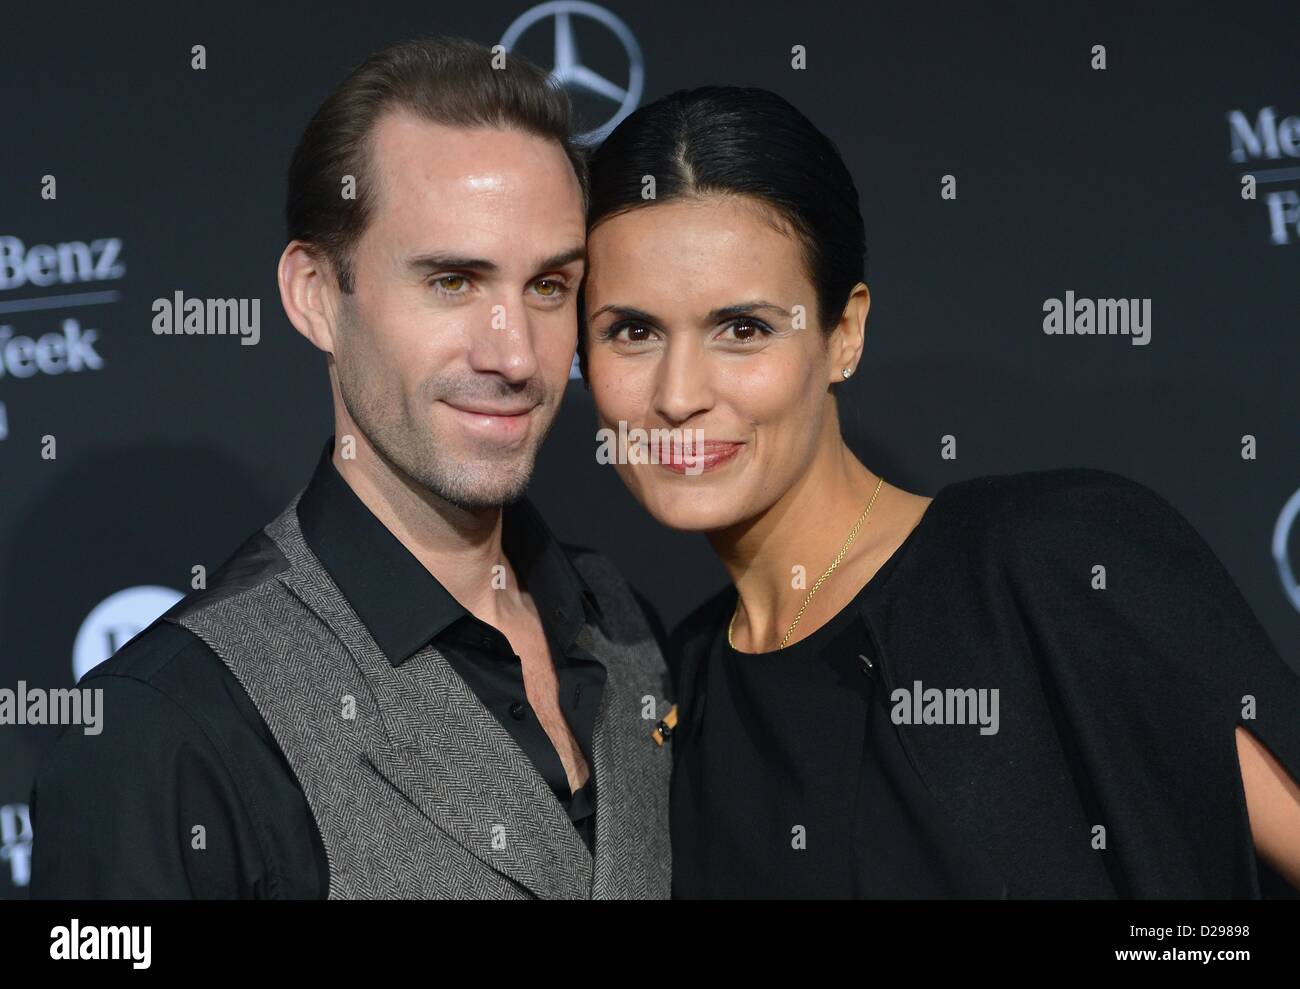 Joseph Fiennes and Maria Dolores Dieguez arrive for the Laurel show during the Mercedes-Benz Fashion Week in Berlin, Germany, 17 January 2013. The presentations of the autumn/winter 2013/2014 collections take place from 15 to 18 January 2013. Photo: Britta Pedersen/dpa Stock Photo